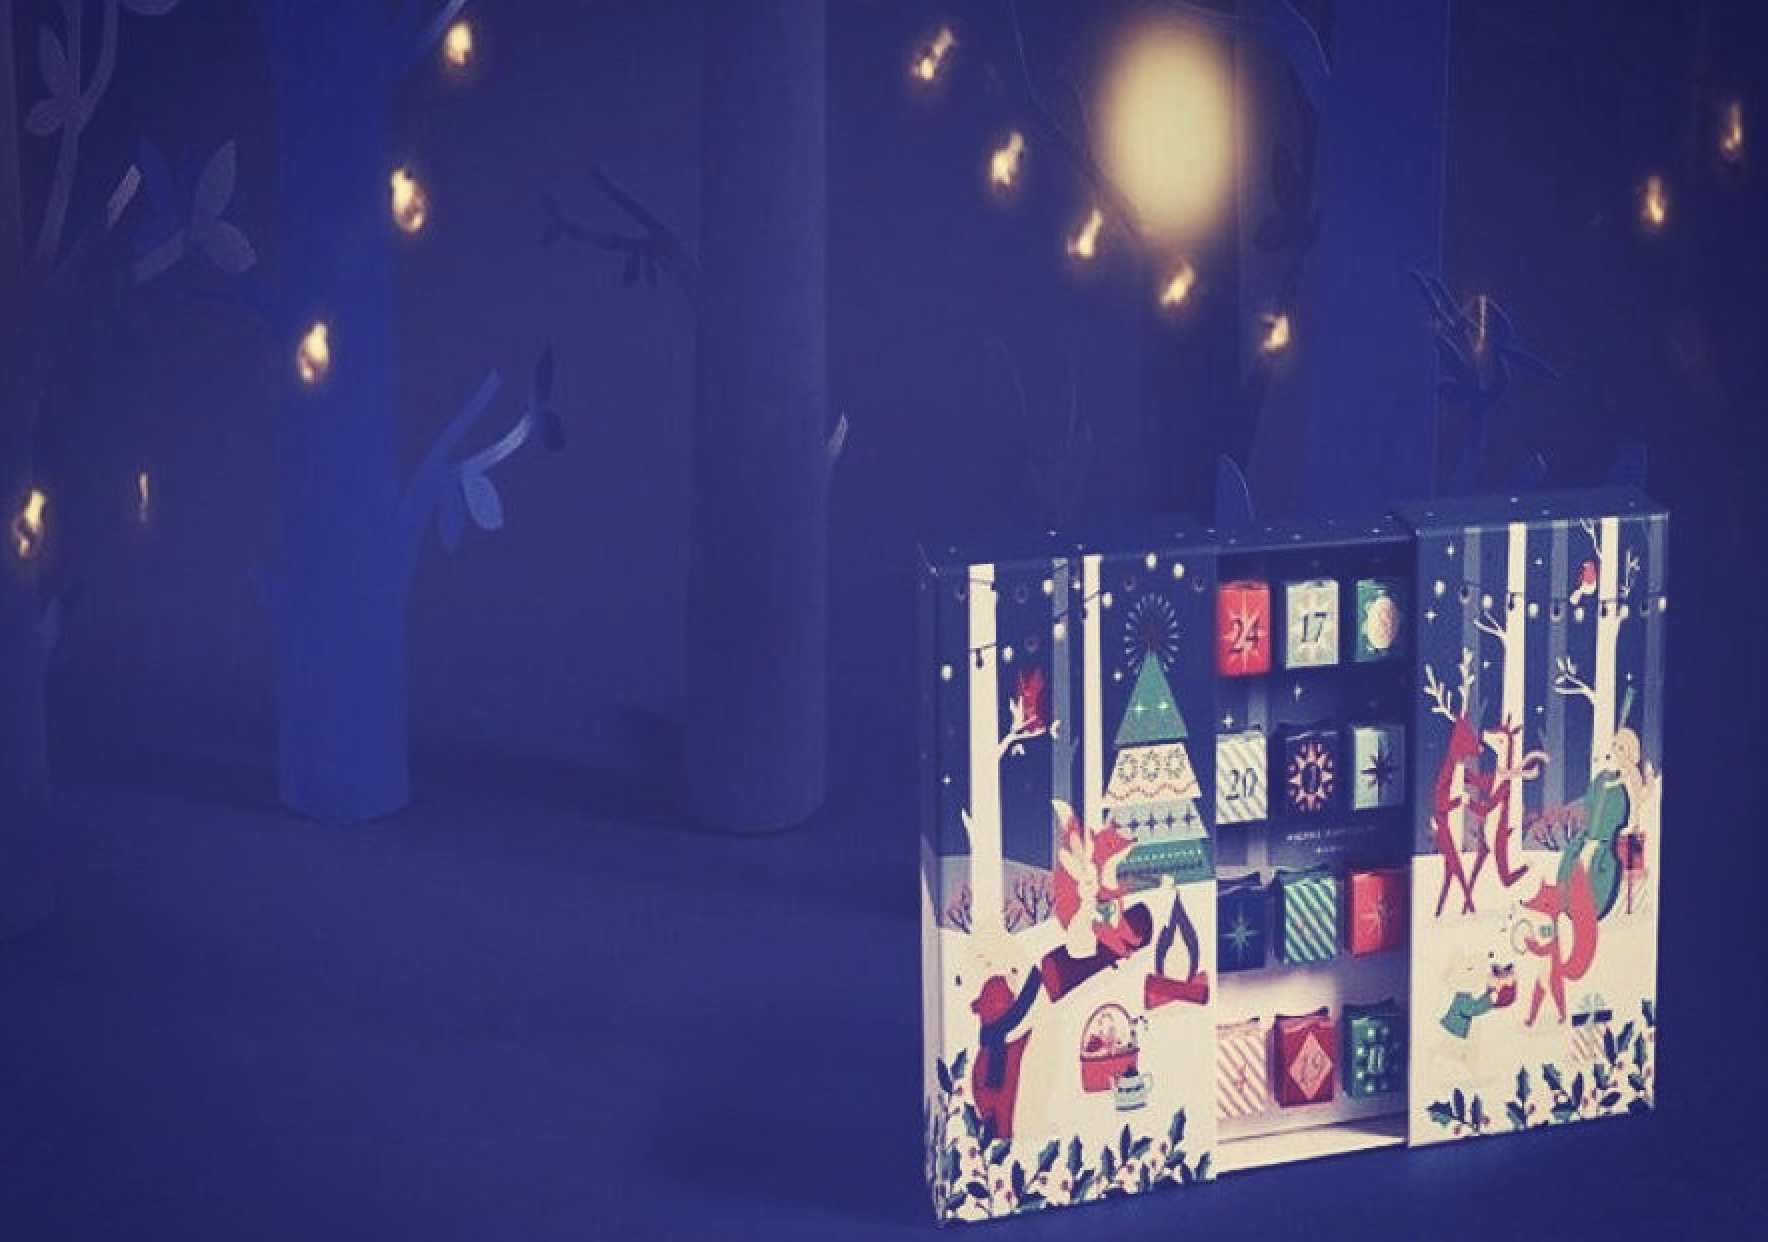 PIERRE MARCOLINI AND ITS NEW ADVENT CALENDAR